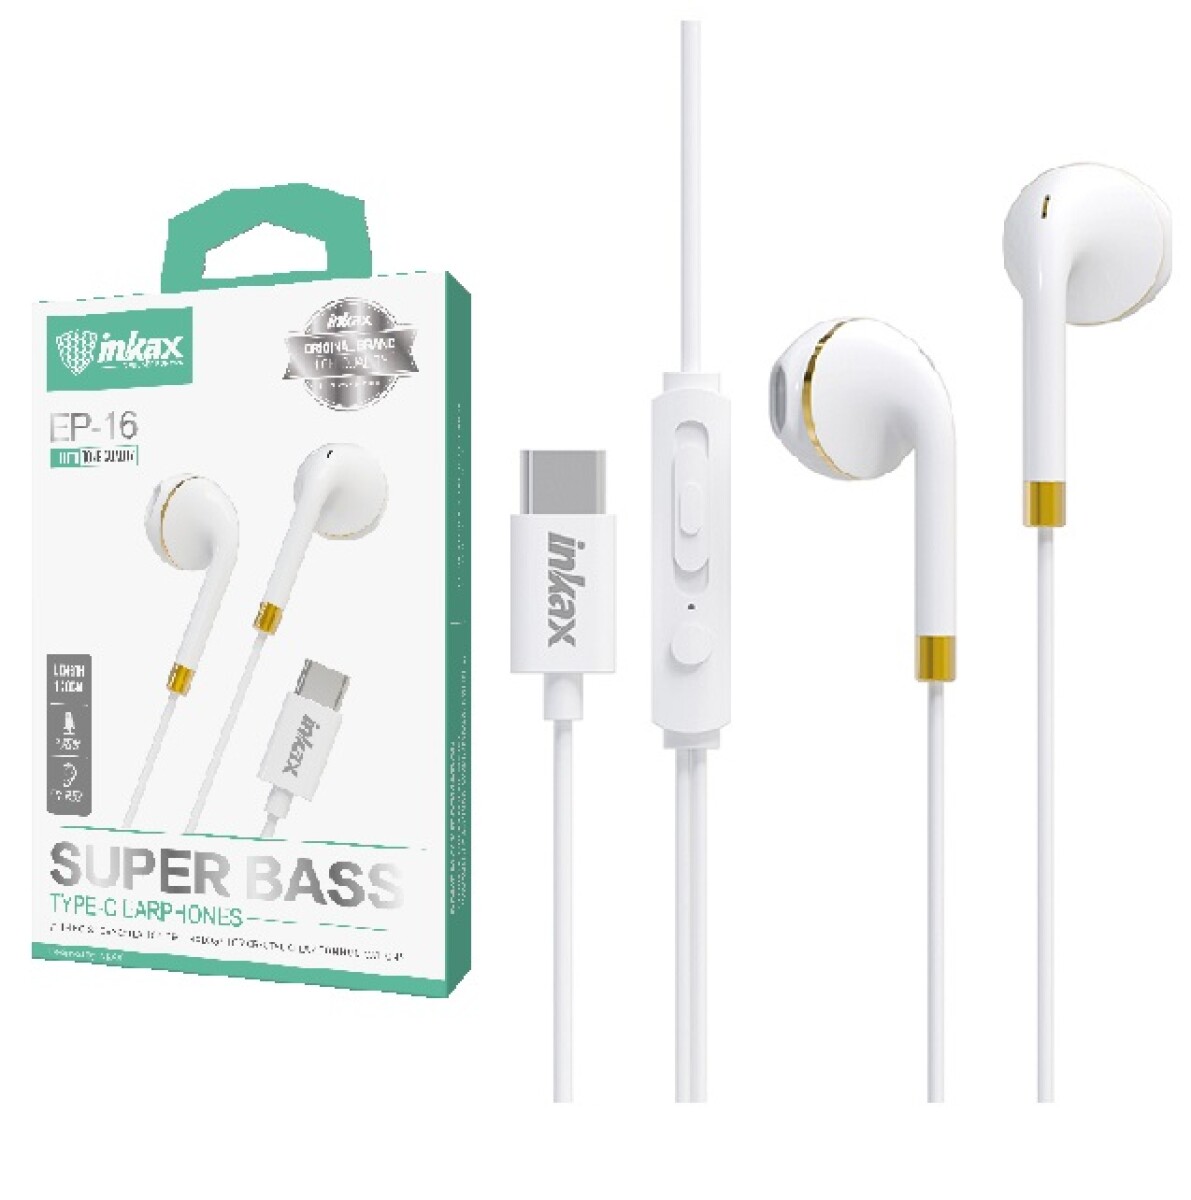 Auriculares Inkax Tipo-c Blancos - 001 